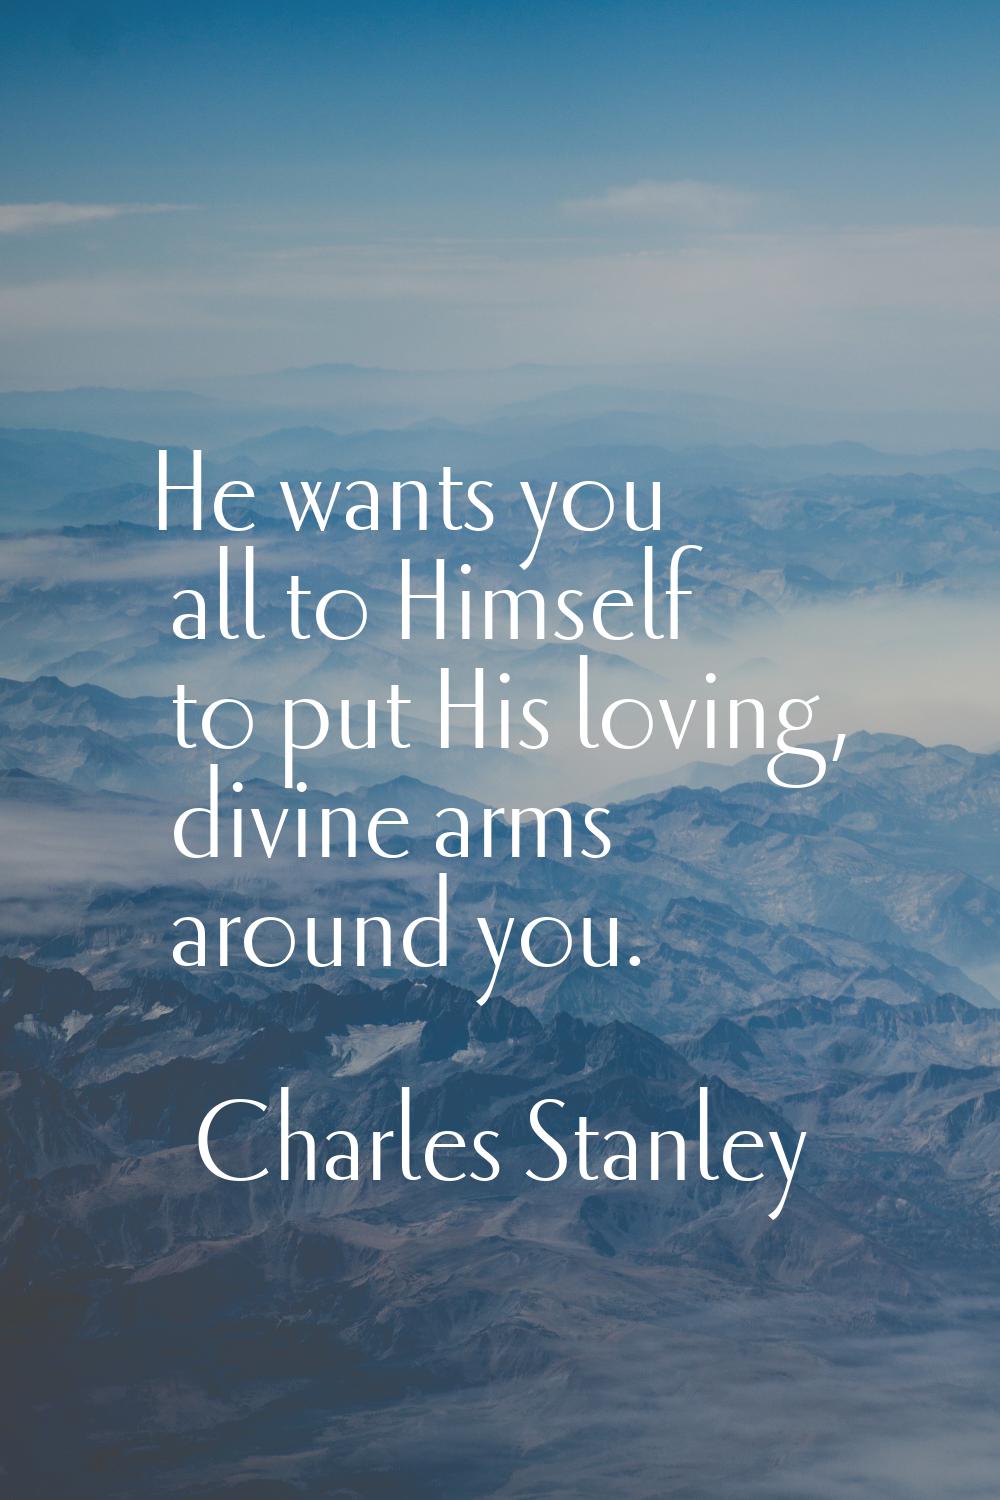 He wants you all to Himself to put His loving, divine arms around you.